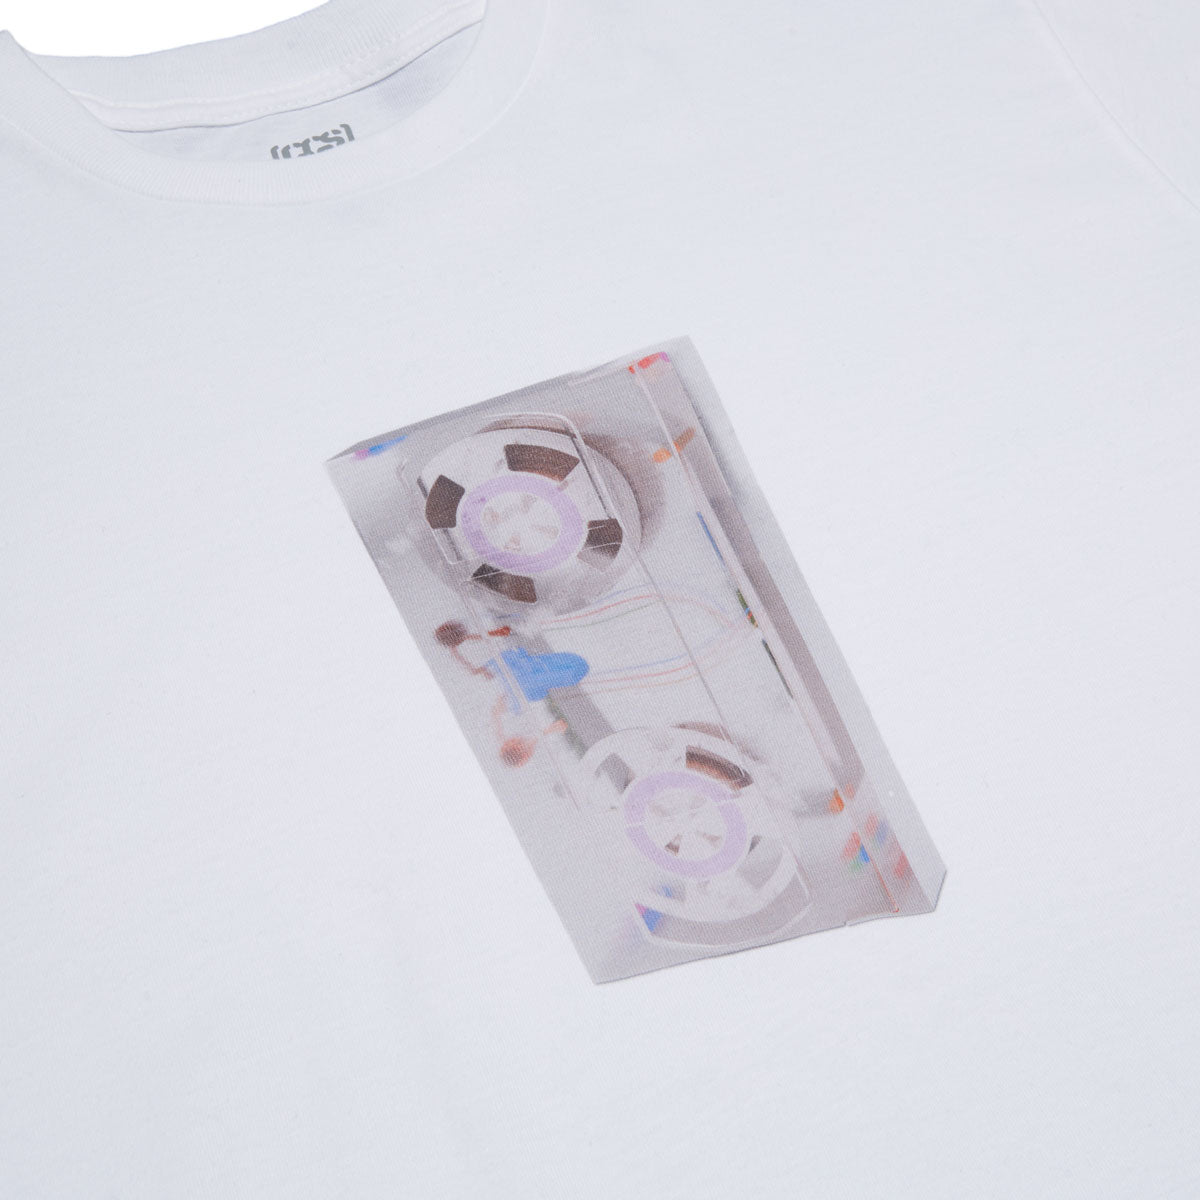 CCS Going Clear VHS T-Shirt - White image 2